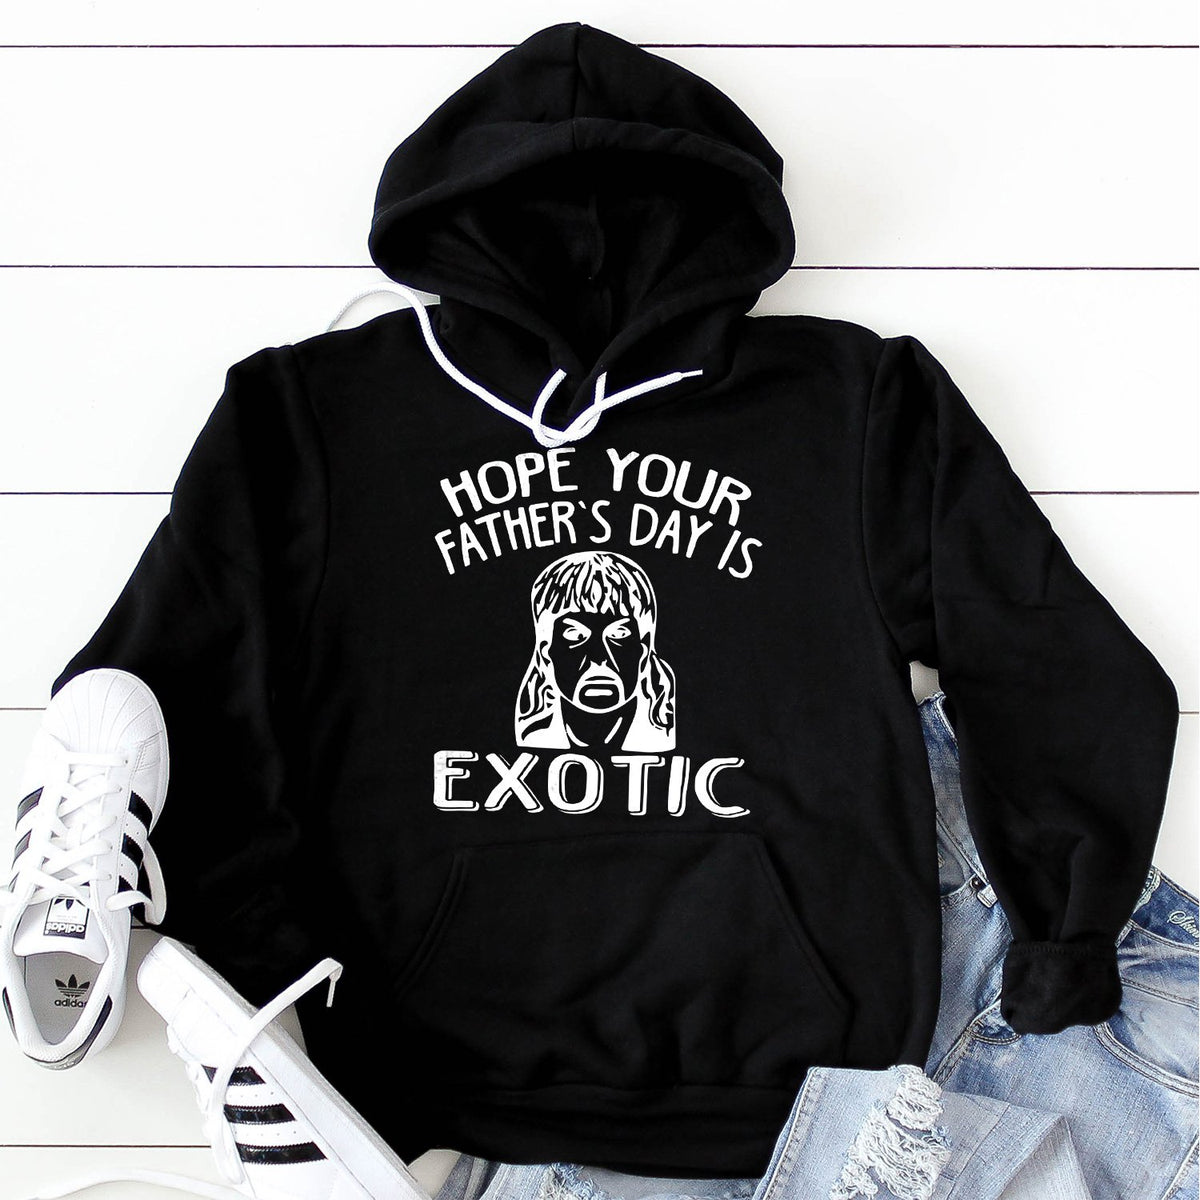 Hope Your Father&#39;s Day is Exotic - Hoodie Sweatshirt